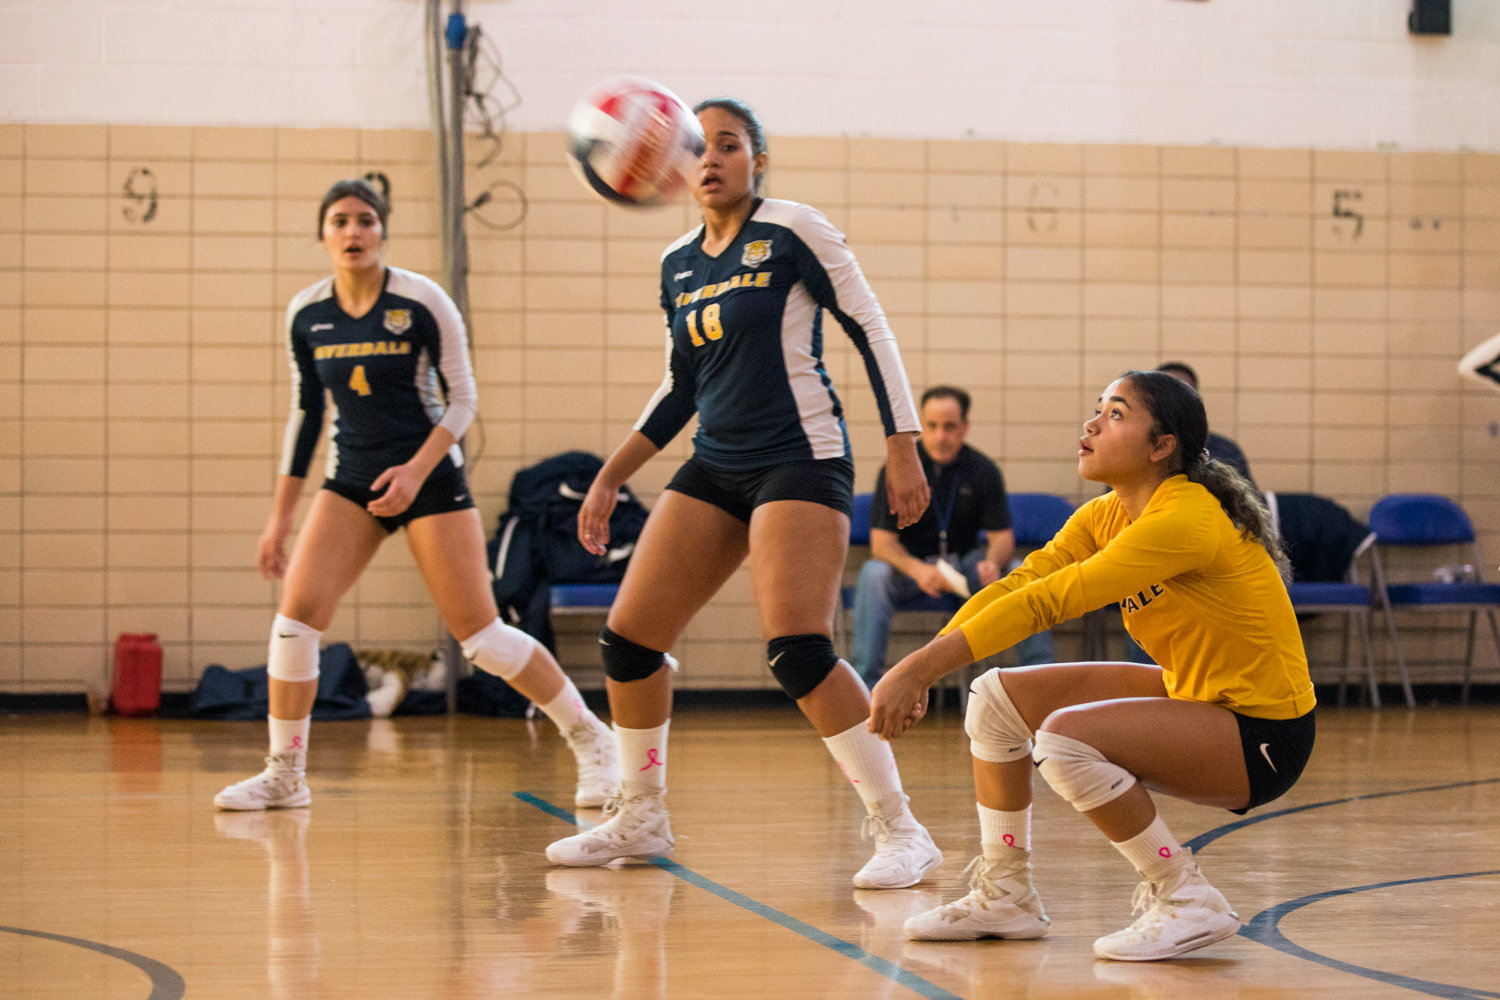 Riverdale/Kingsbridge Academy’s Julianne Fernandez records one of her 17 digs in the Lady Tigers’ straight-set victory over Lehman that clinched the Bronx A-2 Division title.